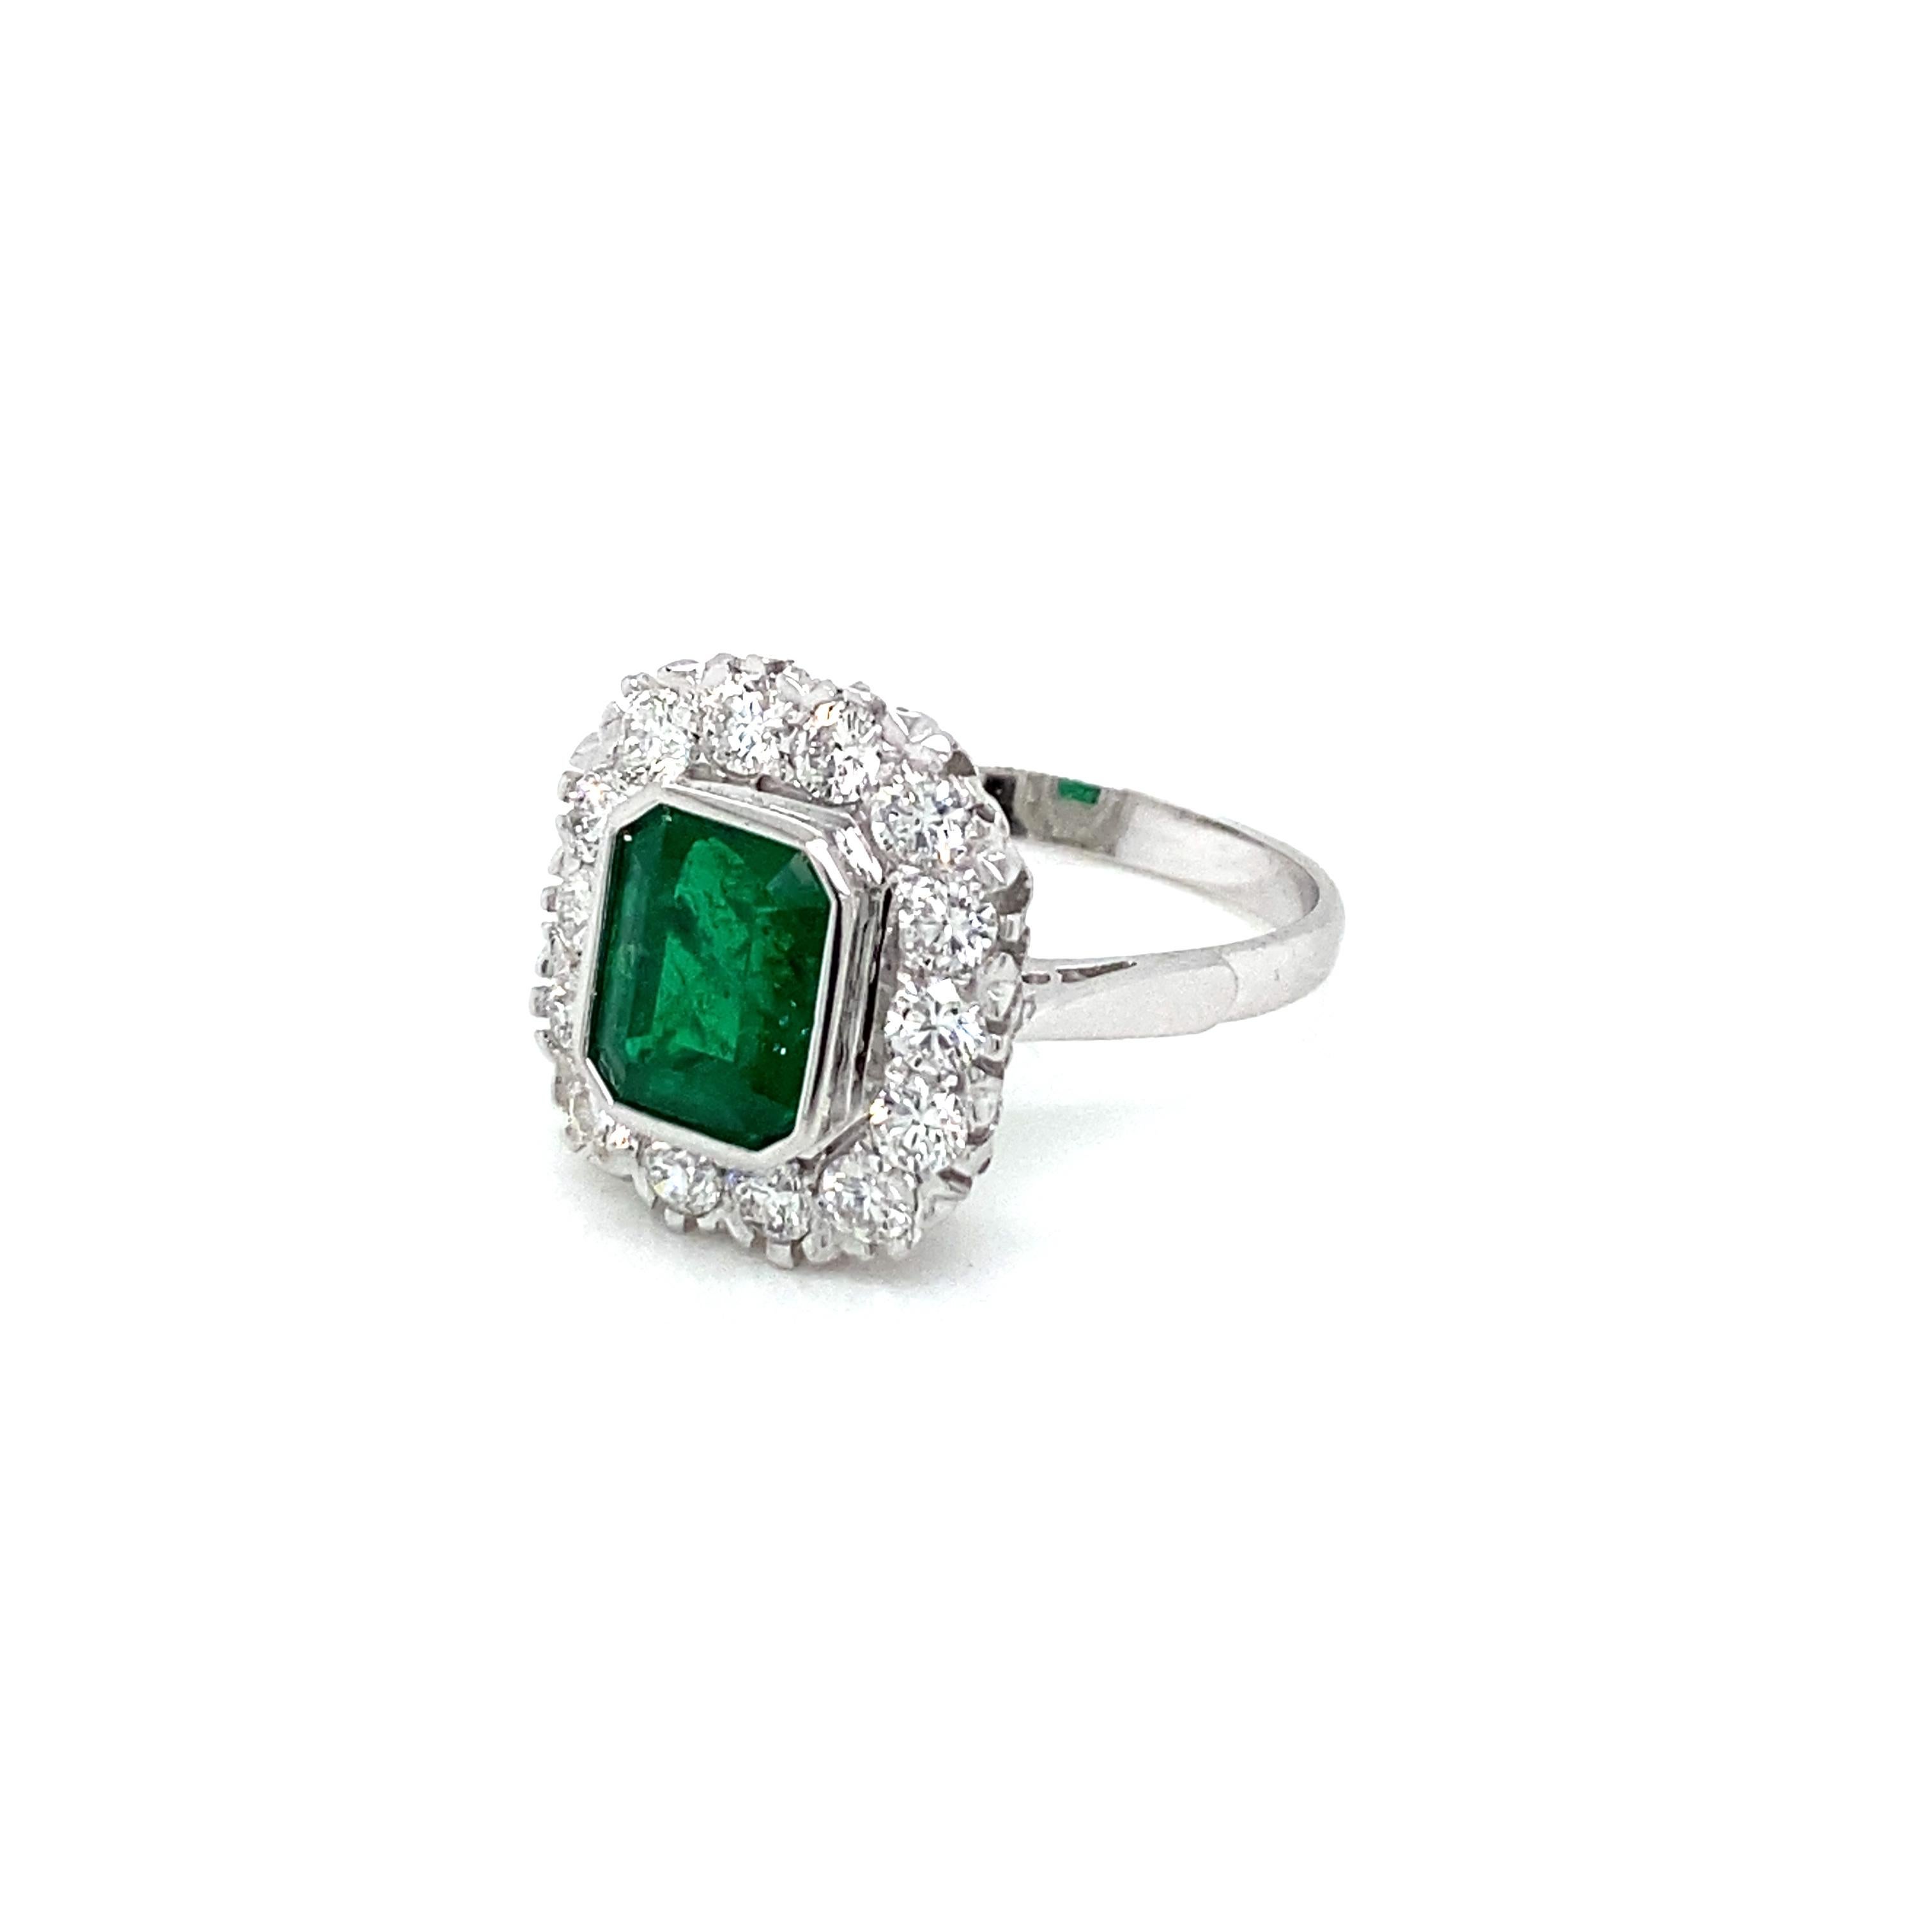 A beautiful and classy 18k white Gold engagement ring showcasing a natural Vivid Colombian Emerald 1,73 carats of great quality, surrounded by 14 Sparkling Round brilliant cut diamonds, total weight 1,10 carats, graded G color Vvs.
Origin Italy,